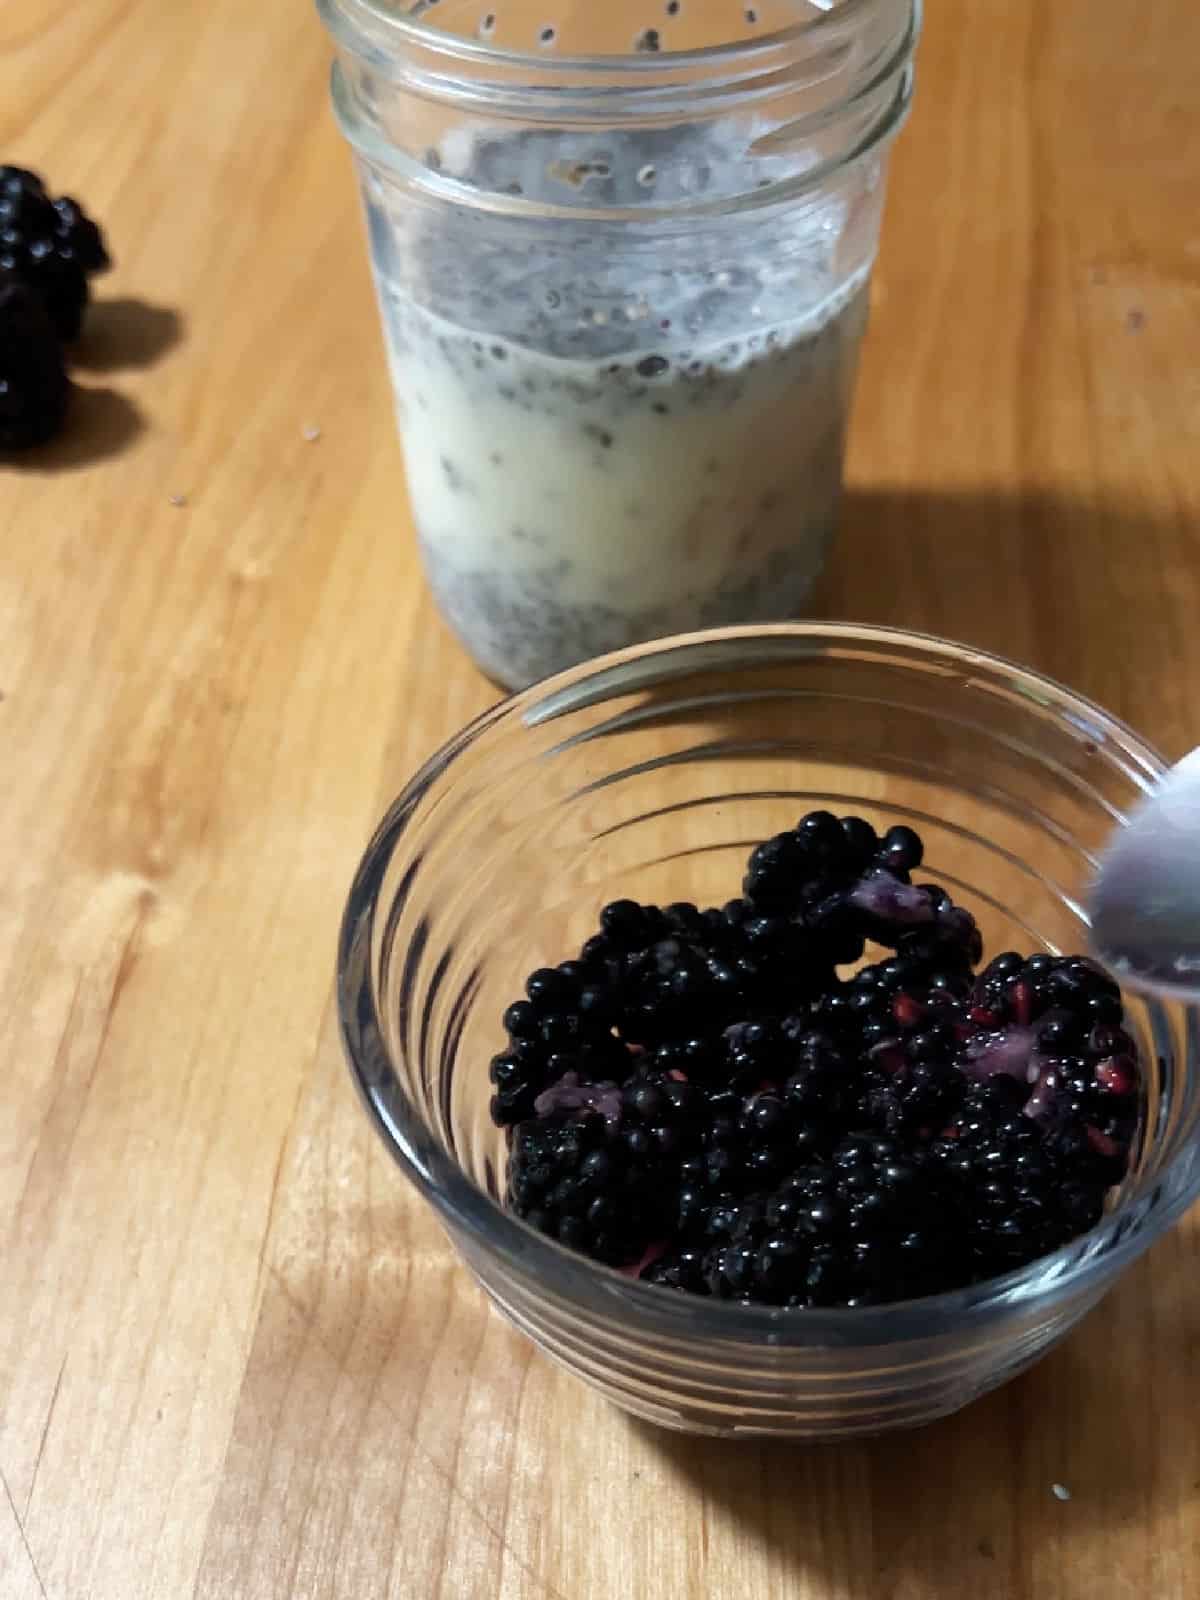 Mashing blackberries in a small bowl.